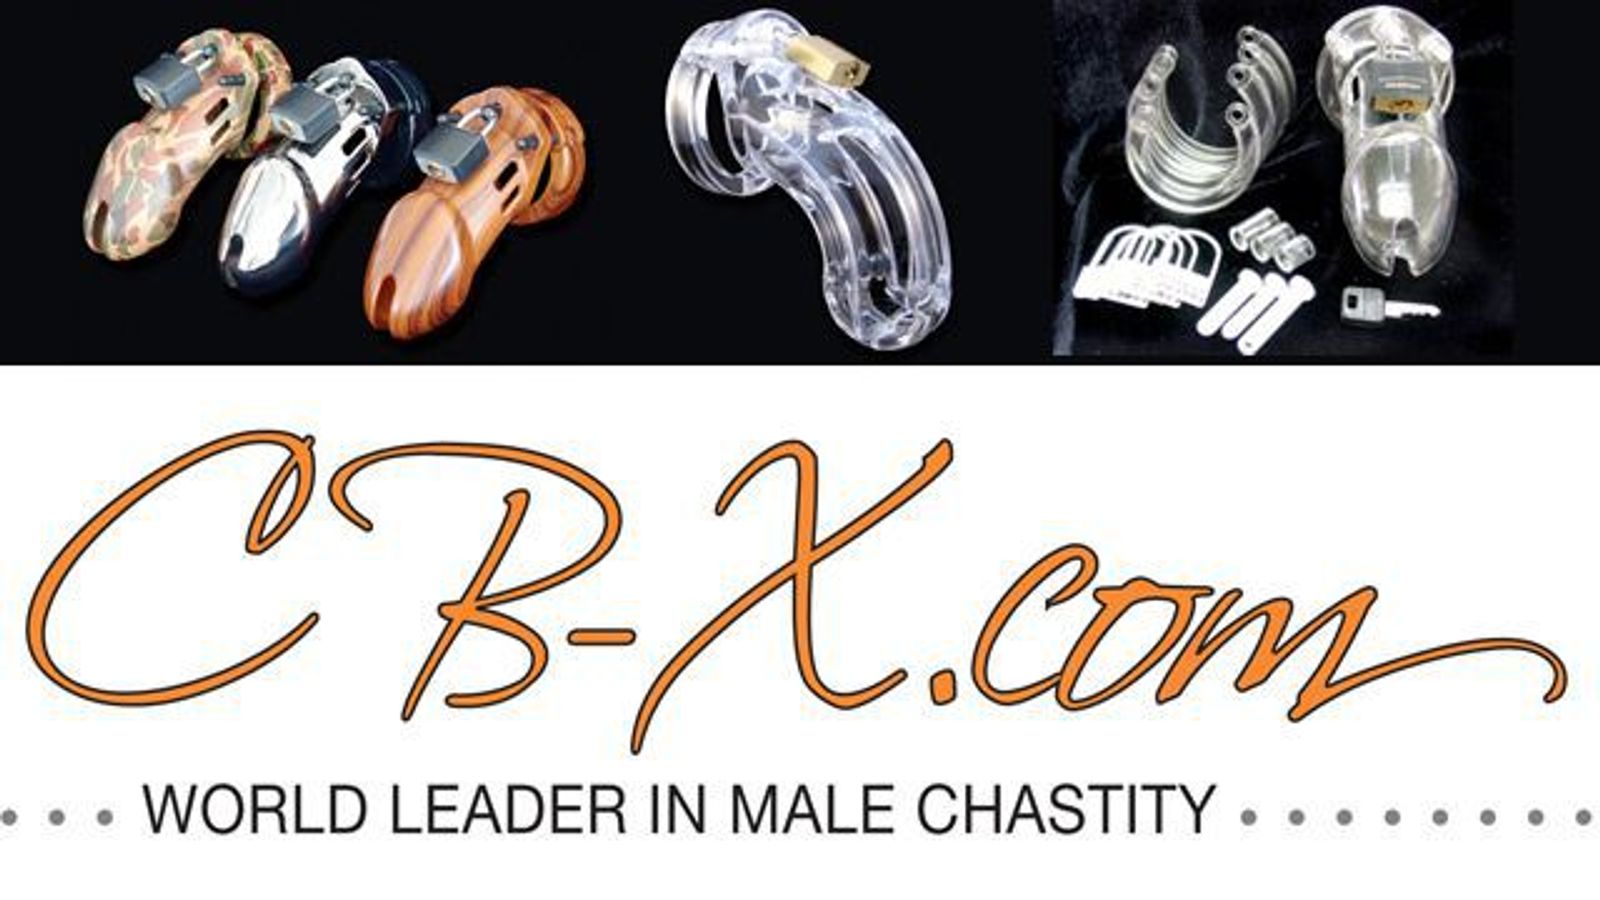 CB-X Male Chastity Now Available in Australia, Brazil And Canada